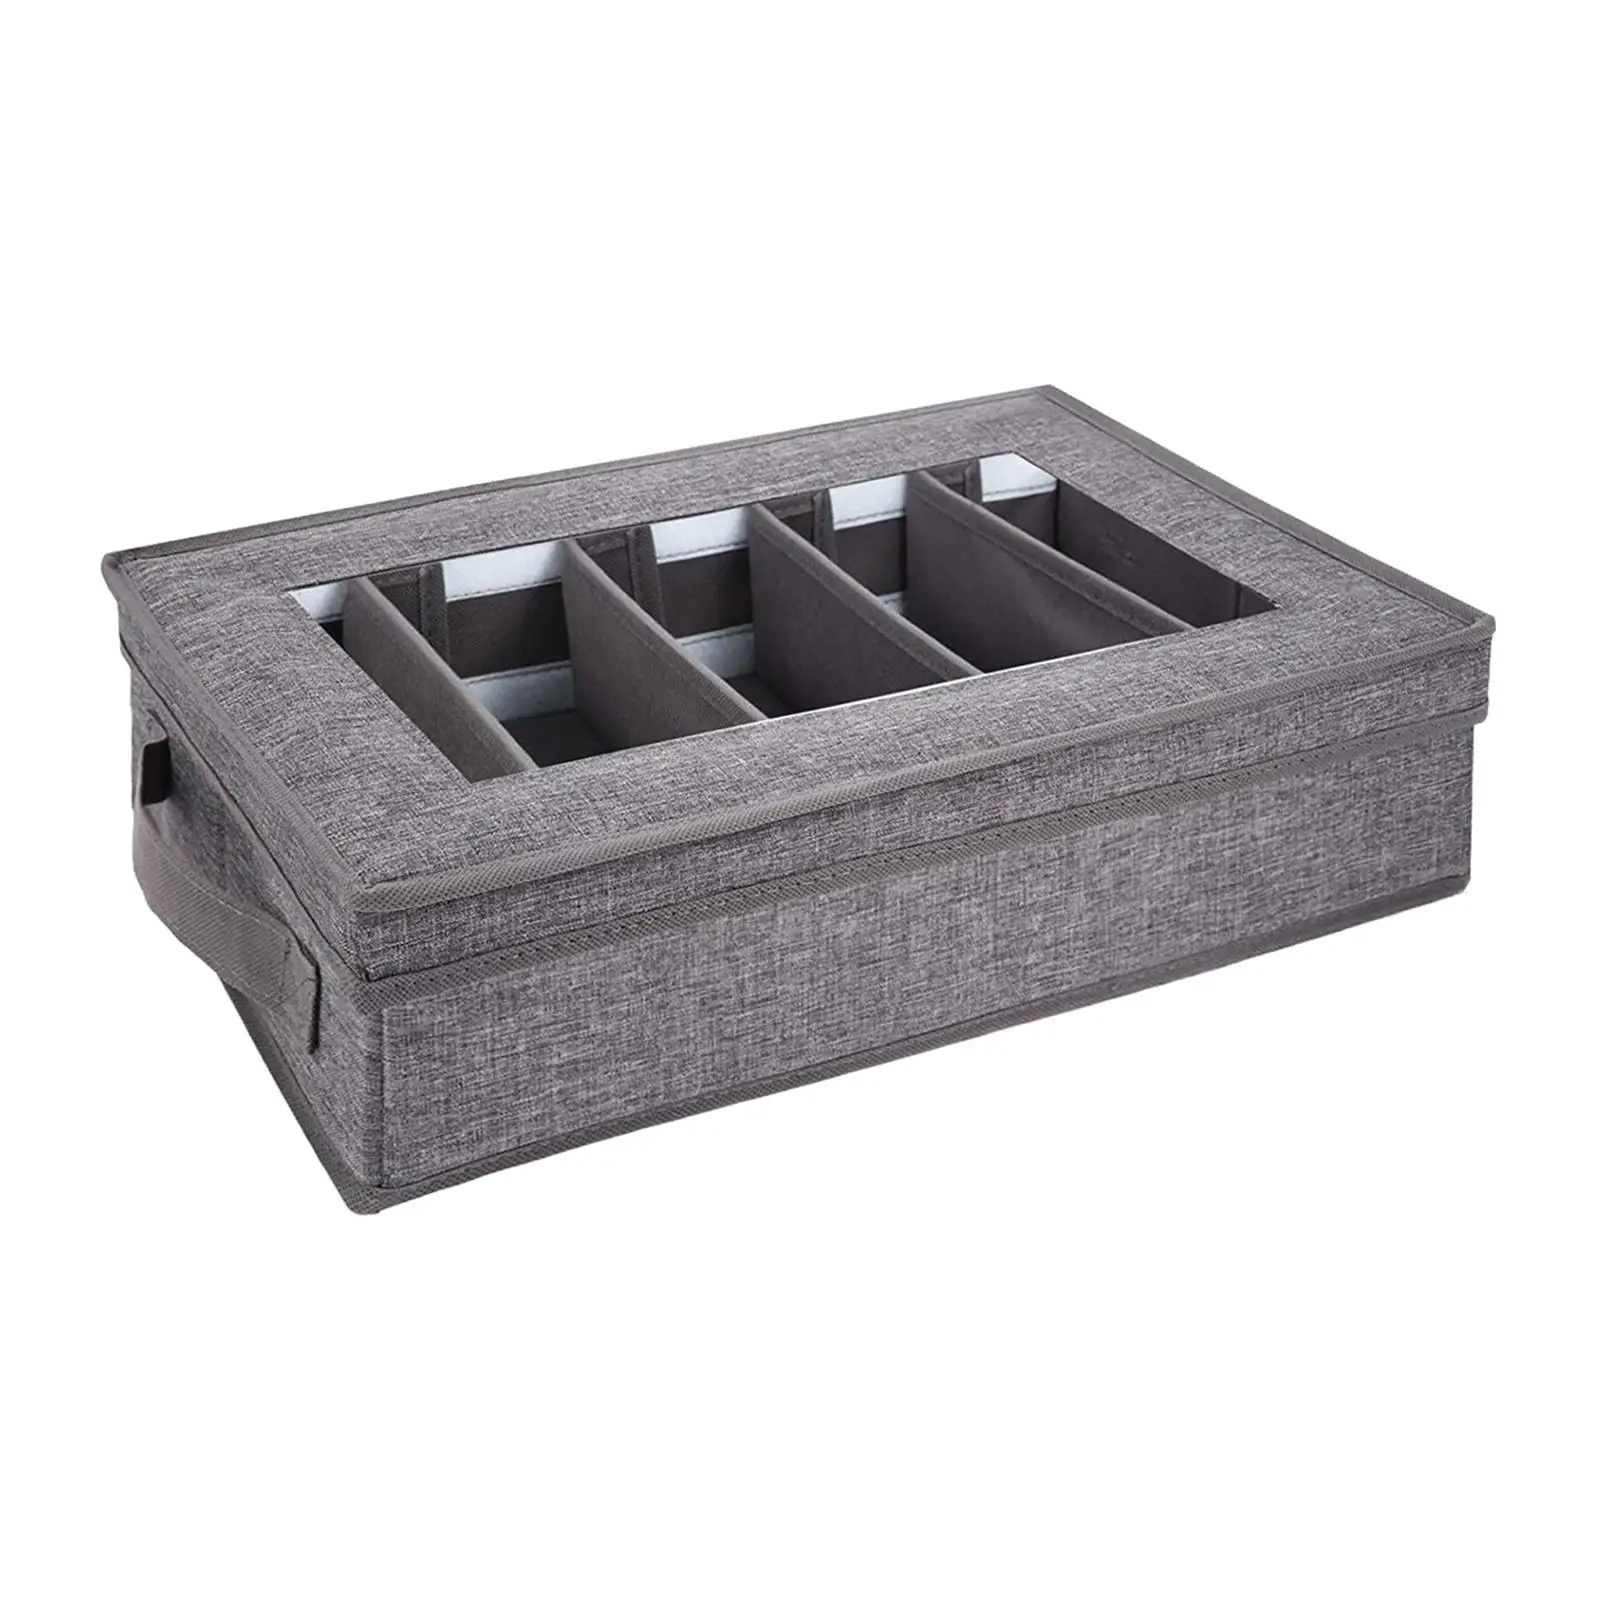 Utensil Chest And Padded Divider with Carry Handle, Utensil Storage Box for